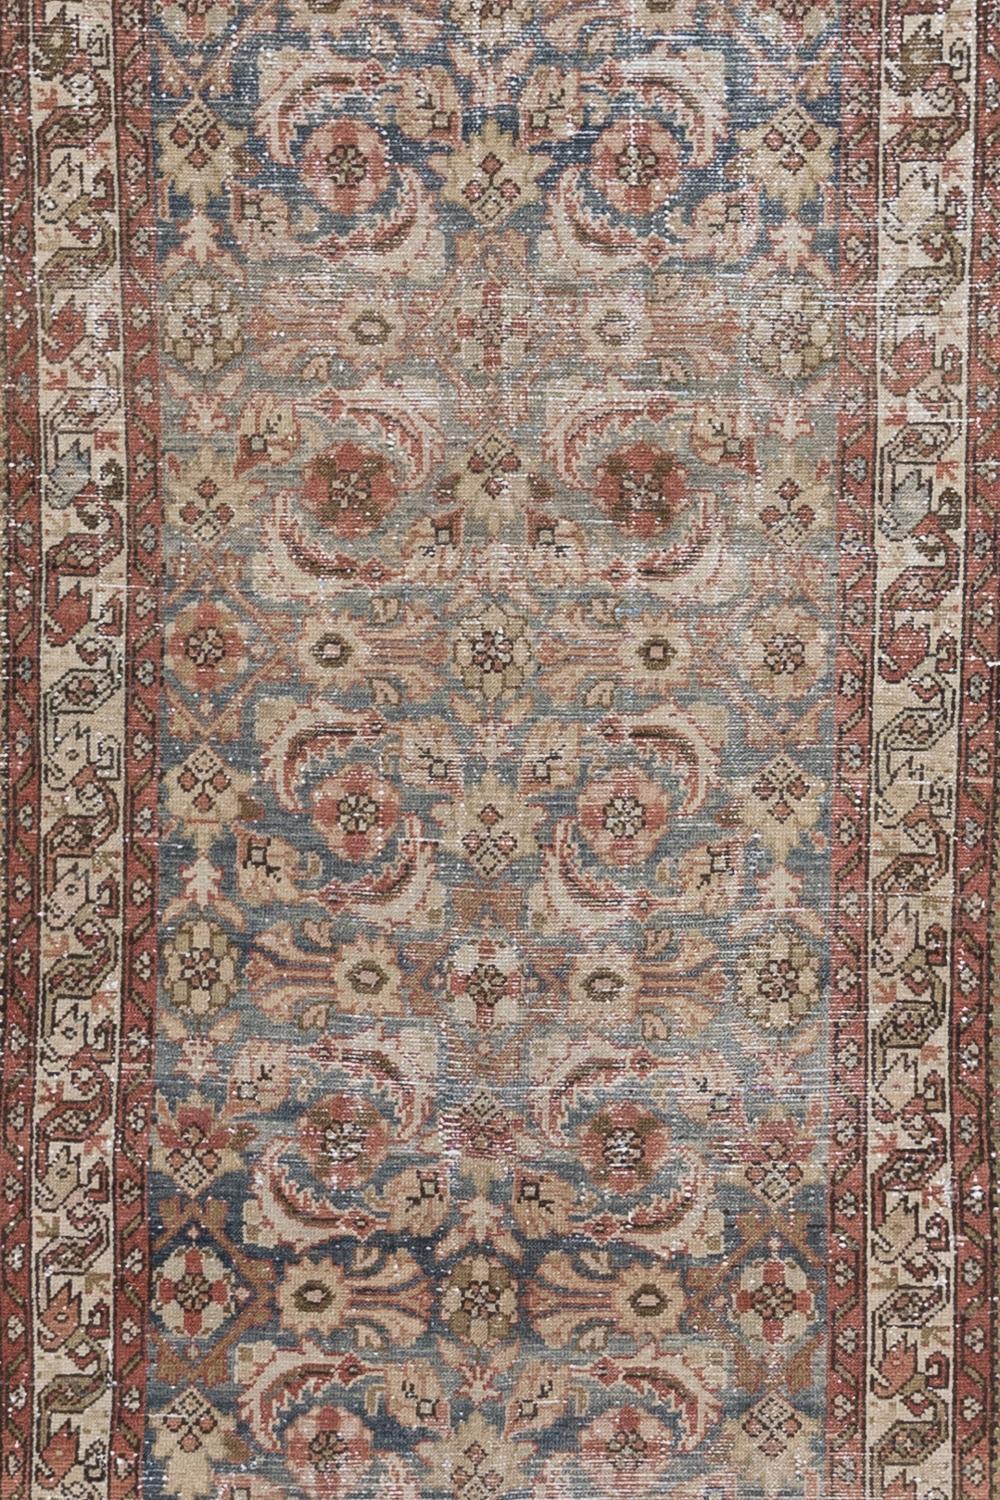 Age: Circa 1940

Colors: blue, blue-gray, rust, green, ivory

Pile: medium 

Wear Notes: 4

Material: wool on cotton

Vintage and antique rugs are by nature, pre-loved and may show evidence of their past. There are varying degrees of wear